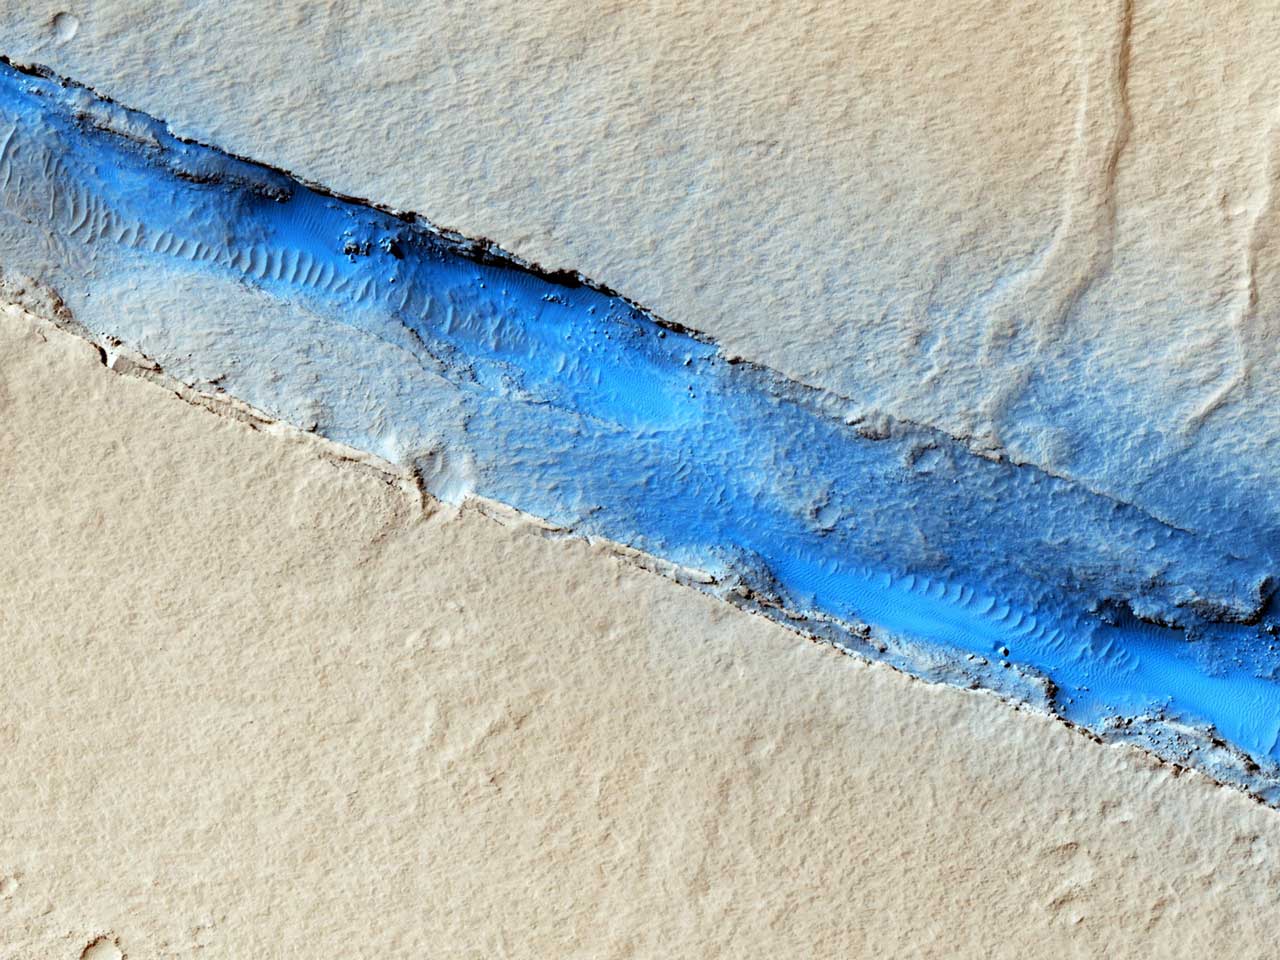 The linearity of the volcanic vent shown in this HiRISE image, in conjunction with evidence of lava flow from the vent, suggests control by combined volcano-tectonic processes.